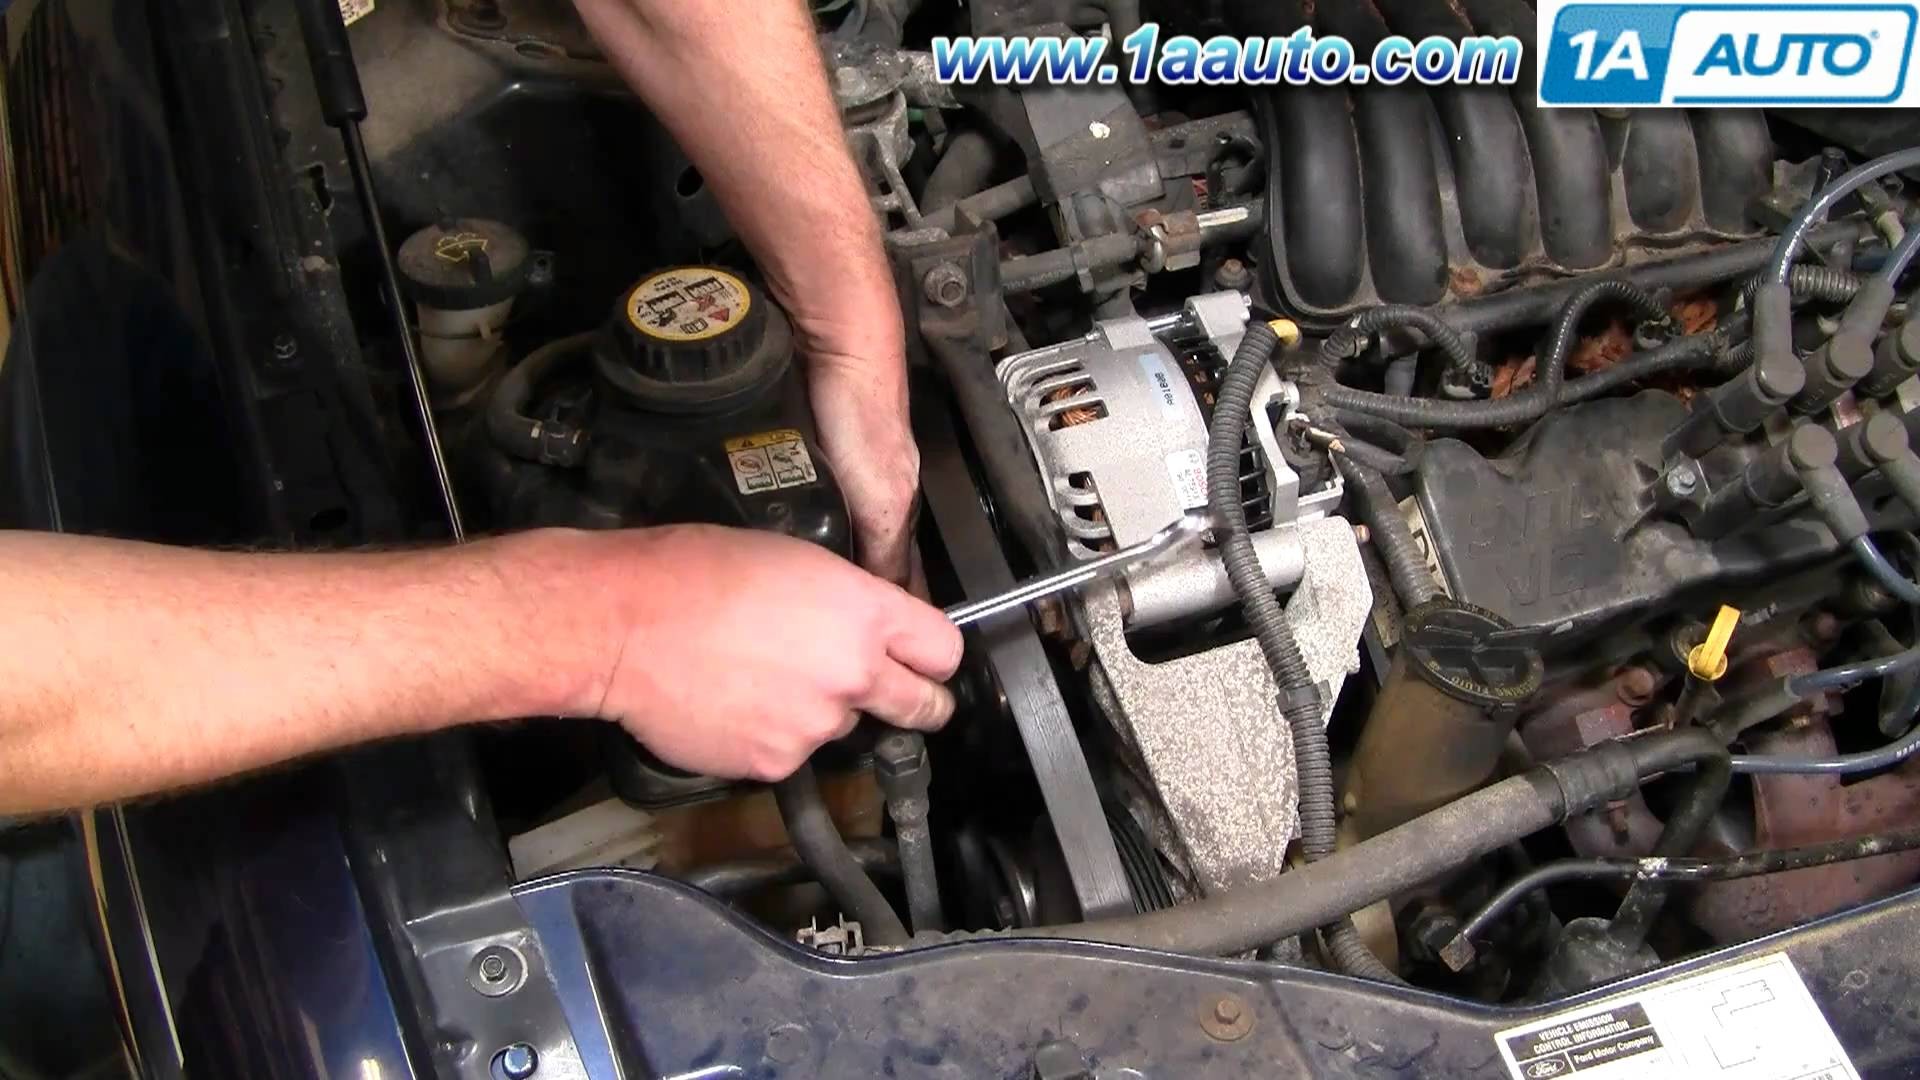 Ford Taurus Engine Diagram How to Install Replace Serpentine Belt Idler Pulley ford Taurus 3 0l Of Ford Taurus Engine Diagram